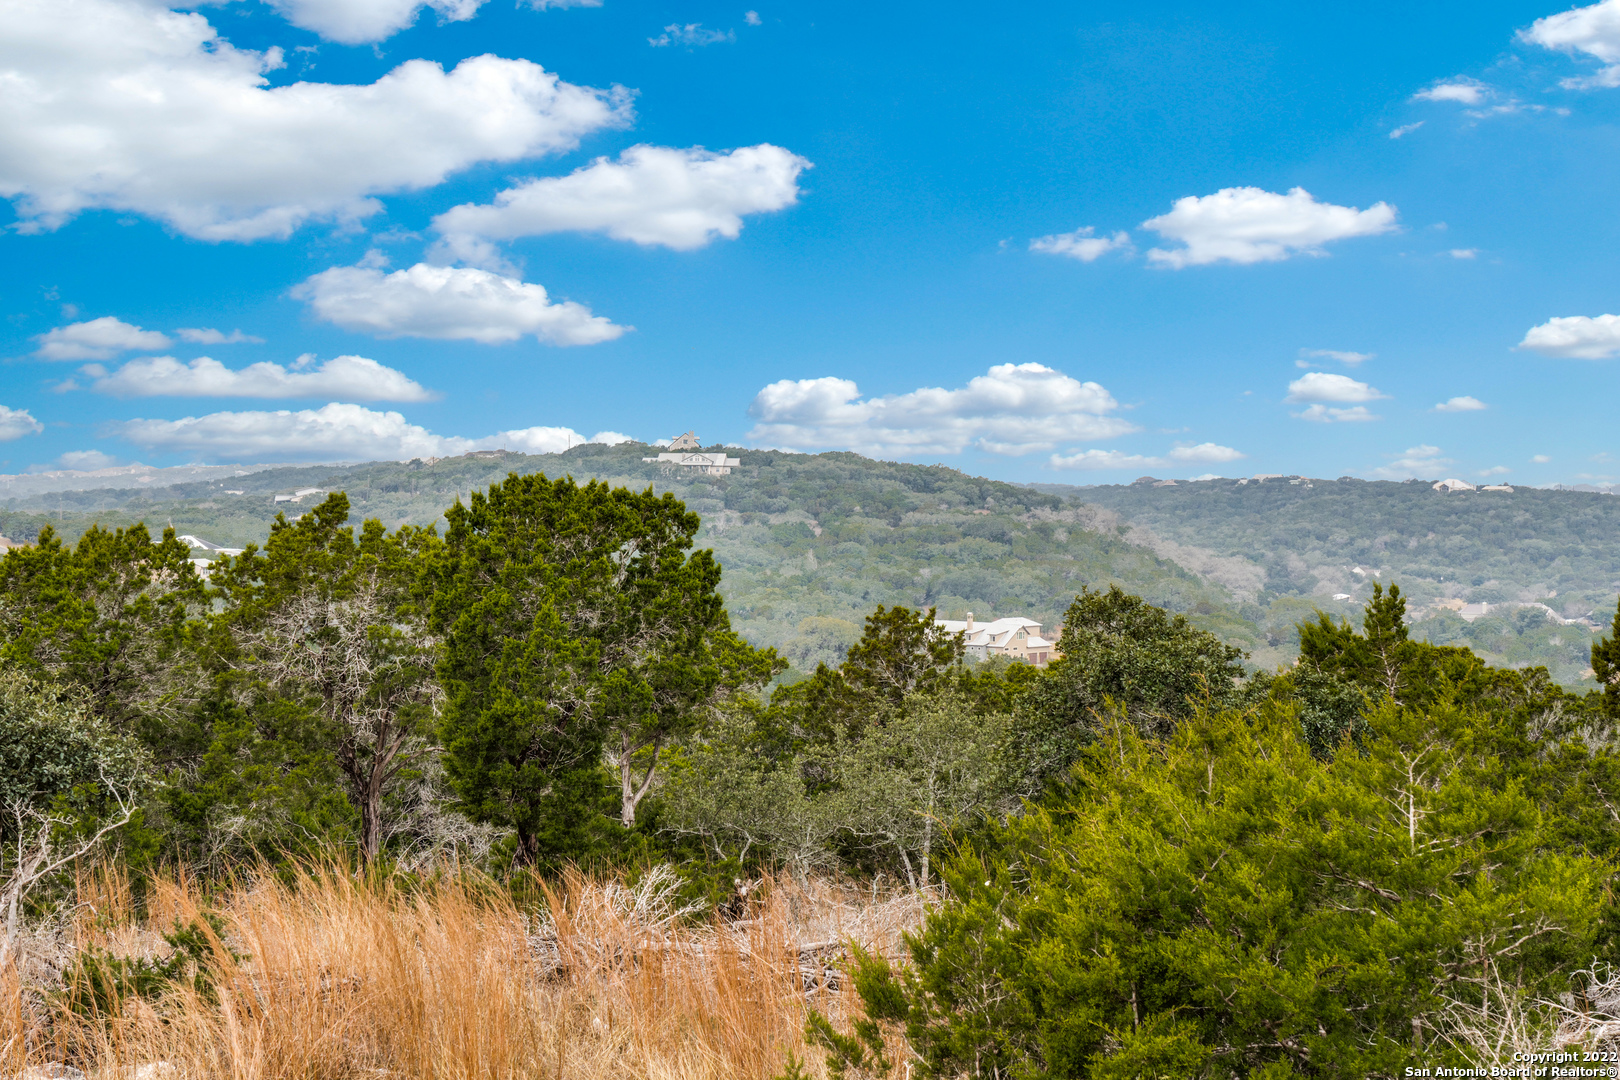 Looking for stunning Texas hill country views and a location to build your dream home? Look no further! This location has it all. Whether you're looking for a permanent residence or a weekend retreat, 4486 Laurie Michelle Road is minutes away from city living yet secluded from the hustle and bustle. This property offers approximately 25 acres to build on. The possibilities are endless. With gorgeous sunsets right at your fingertips, bring your thinking cap and see this property for yourself.